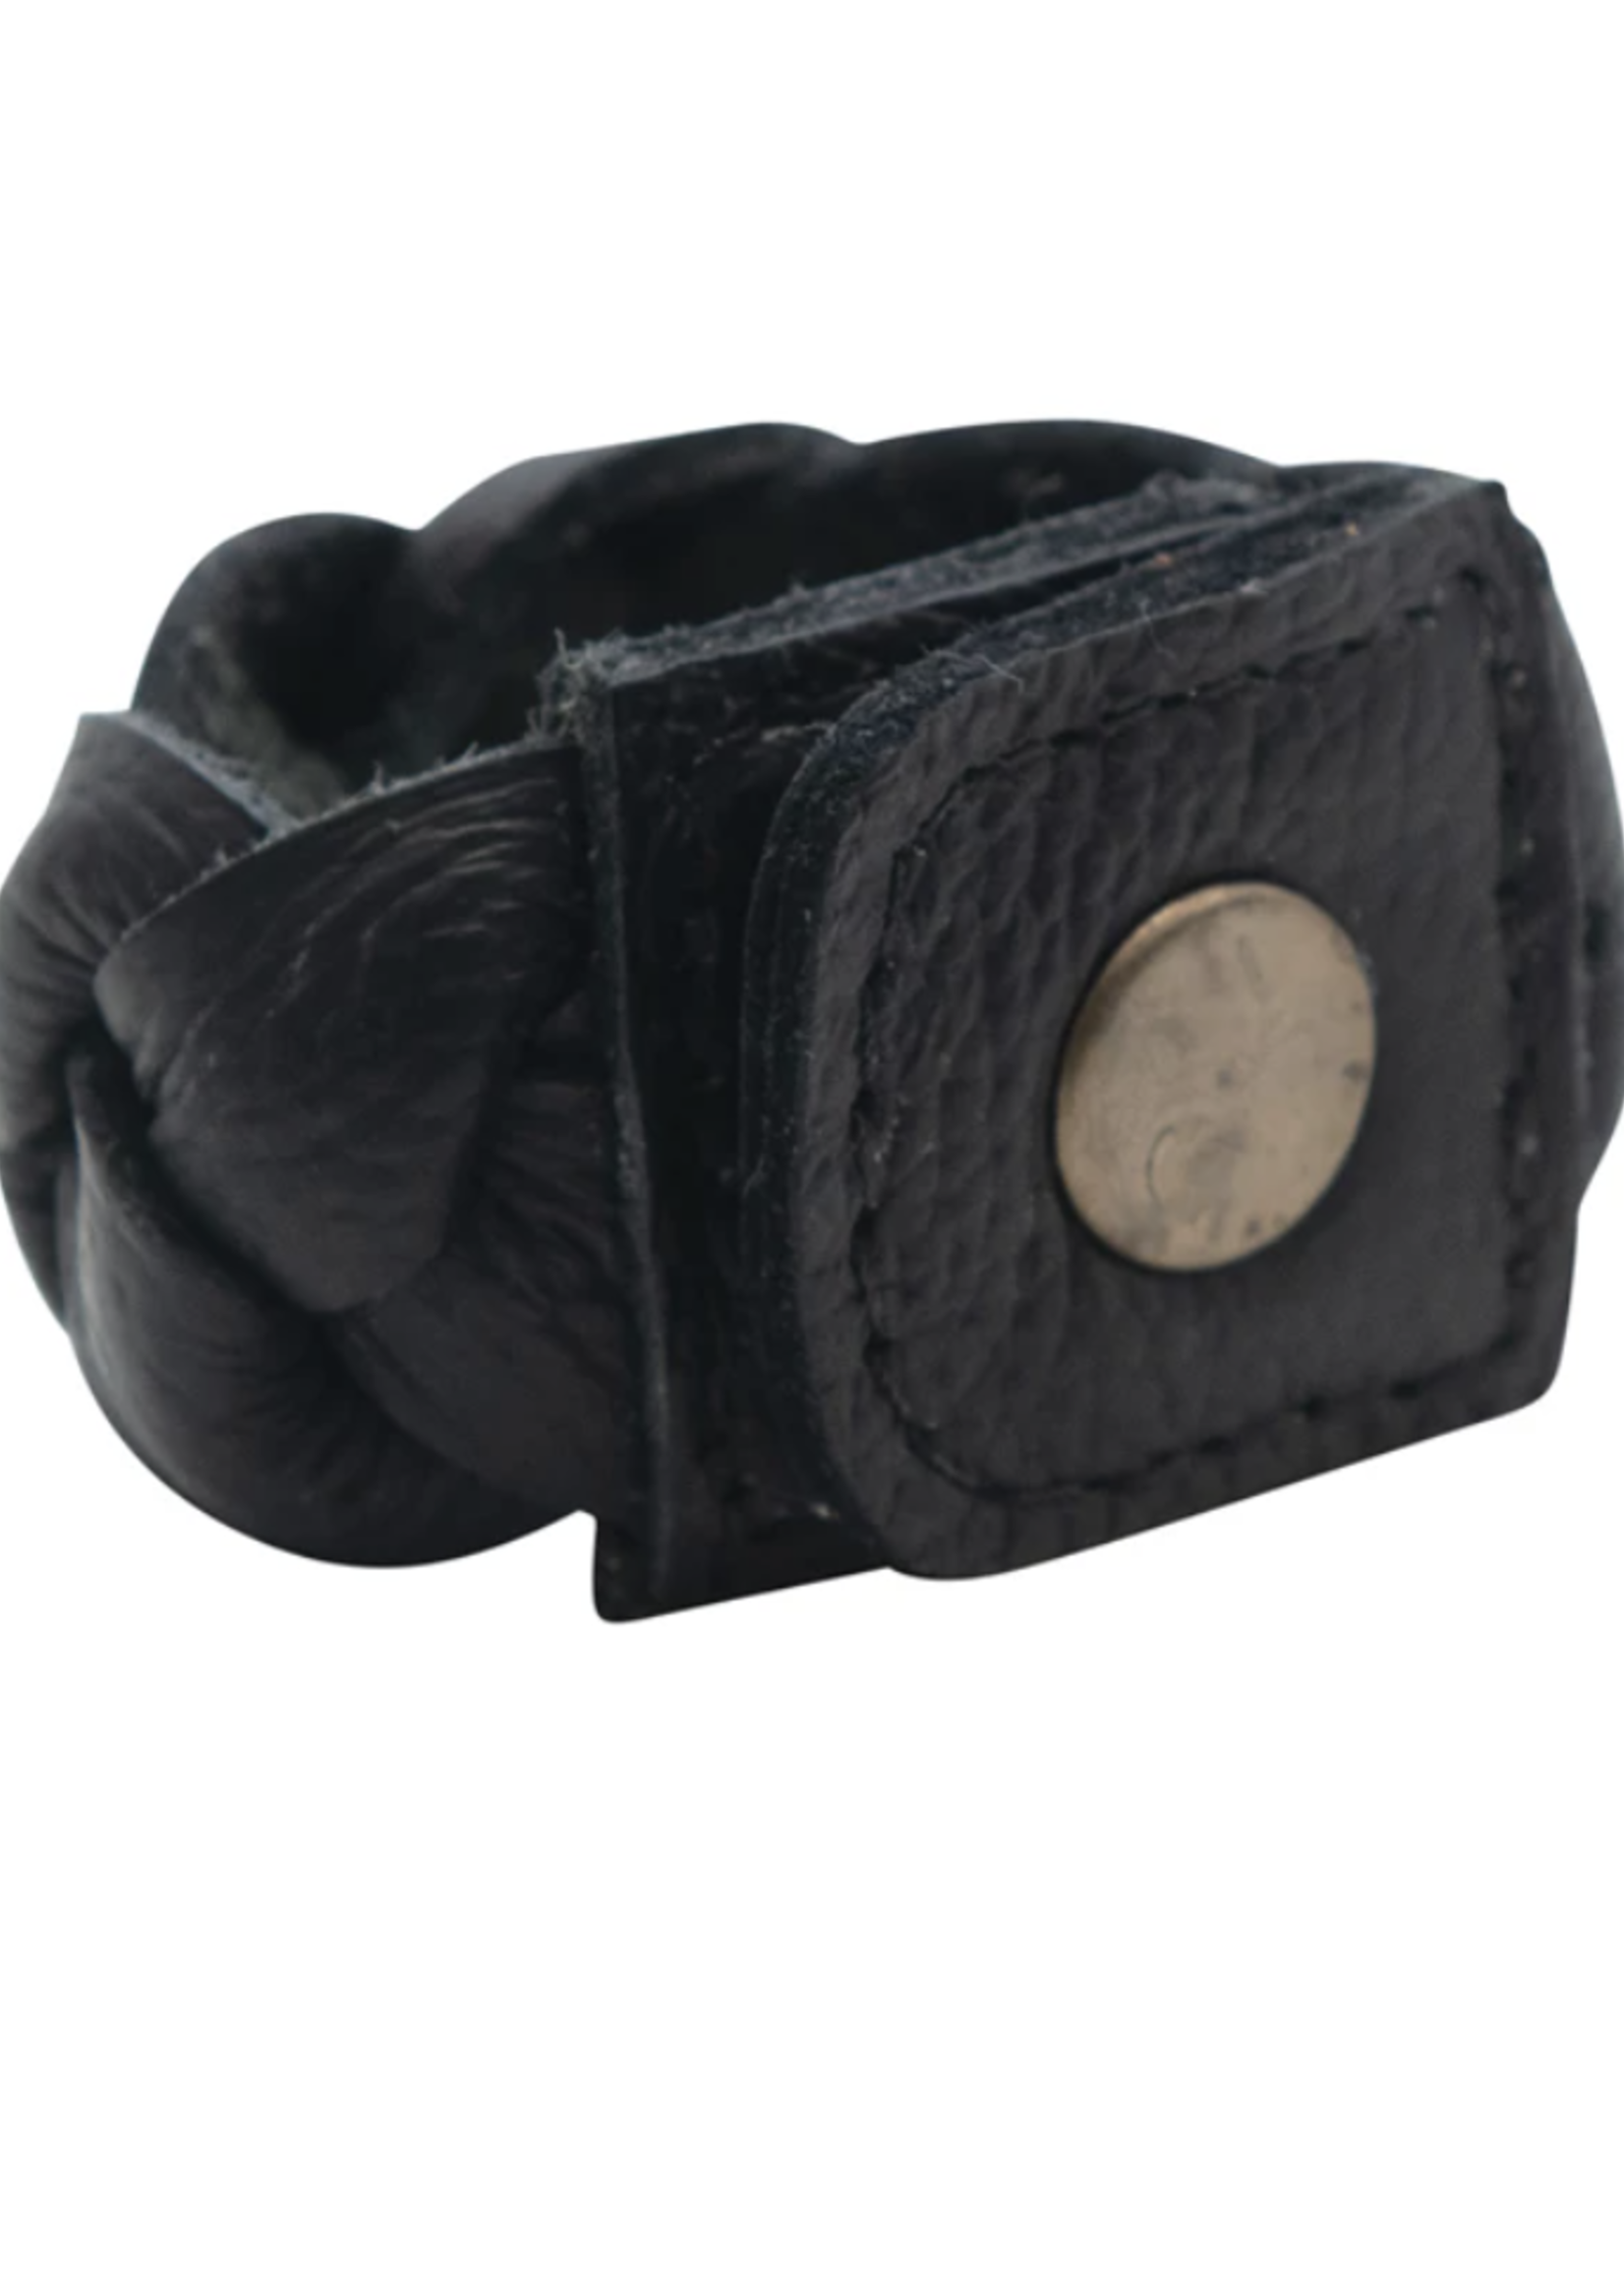 Creative Co-Op Braided Leather Napkin Ring w/ Snap Closure, Black